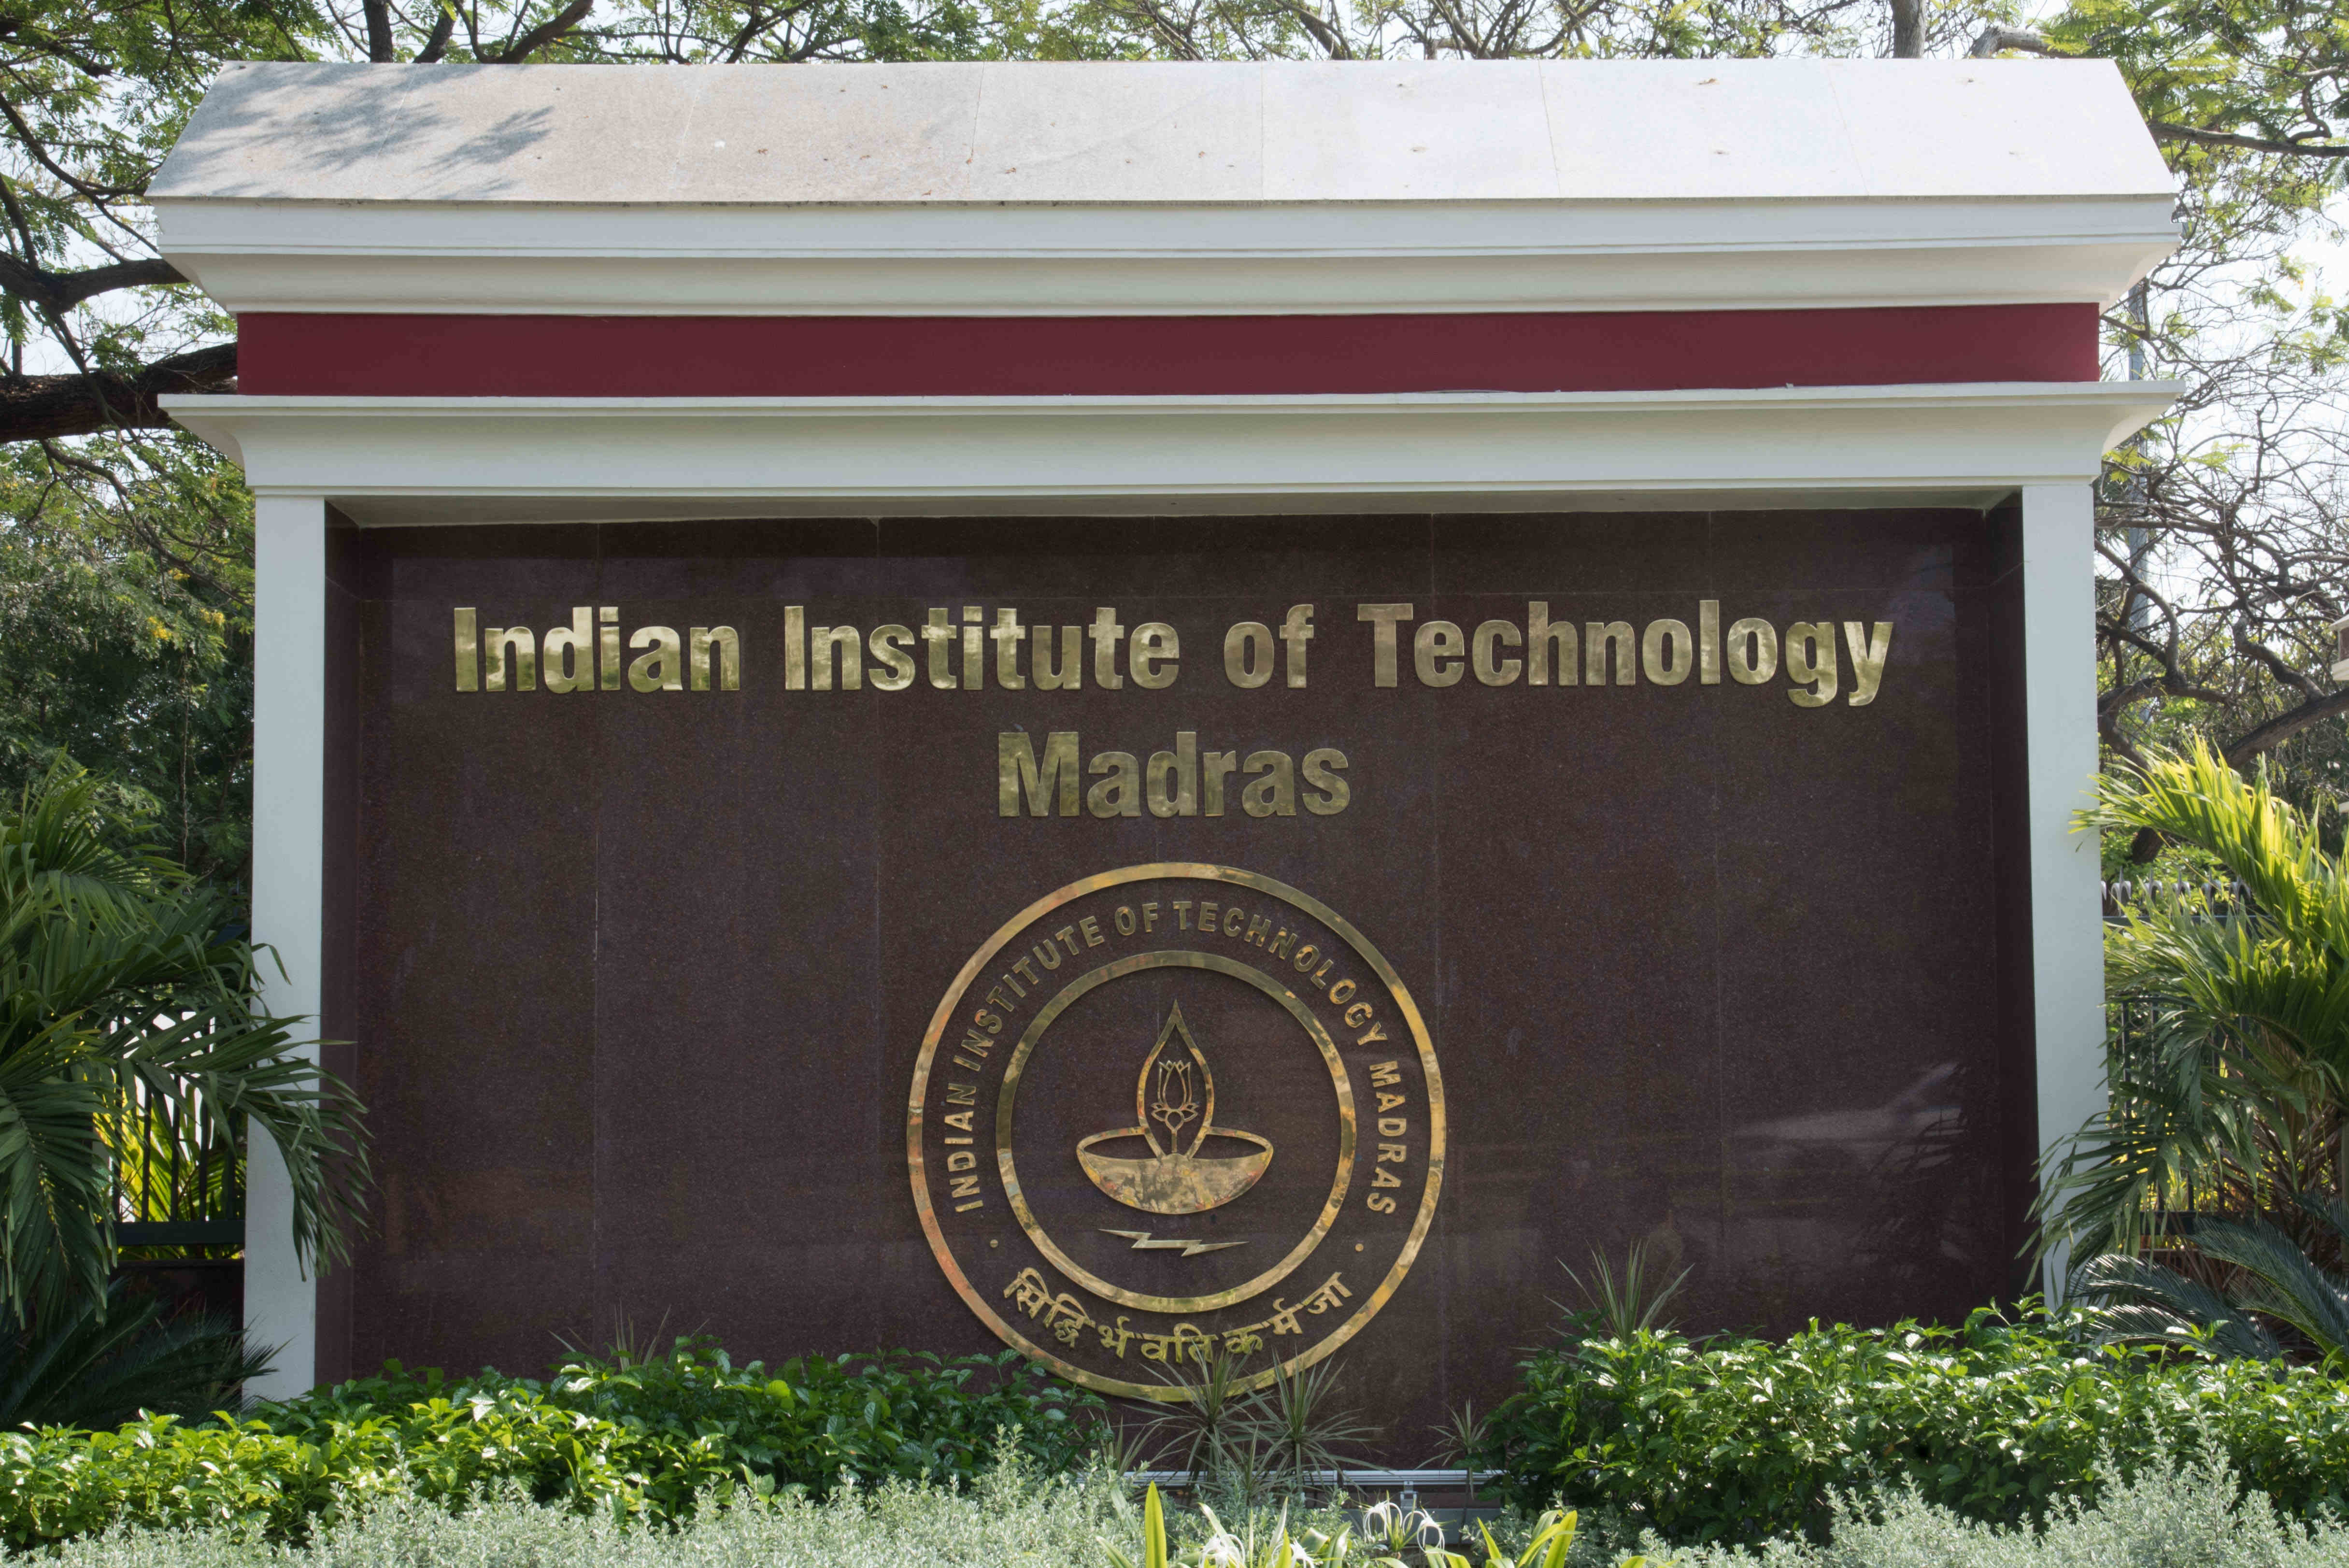 IIT Madras BS Degree programs calls for applications for the next batch